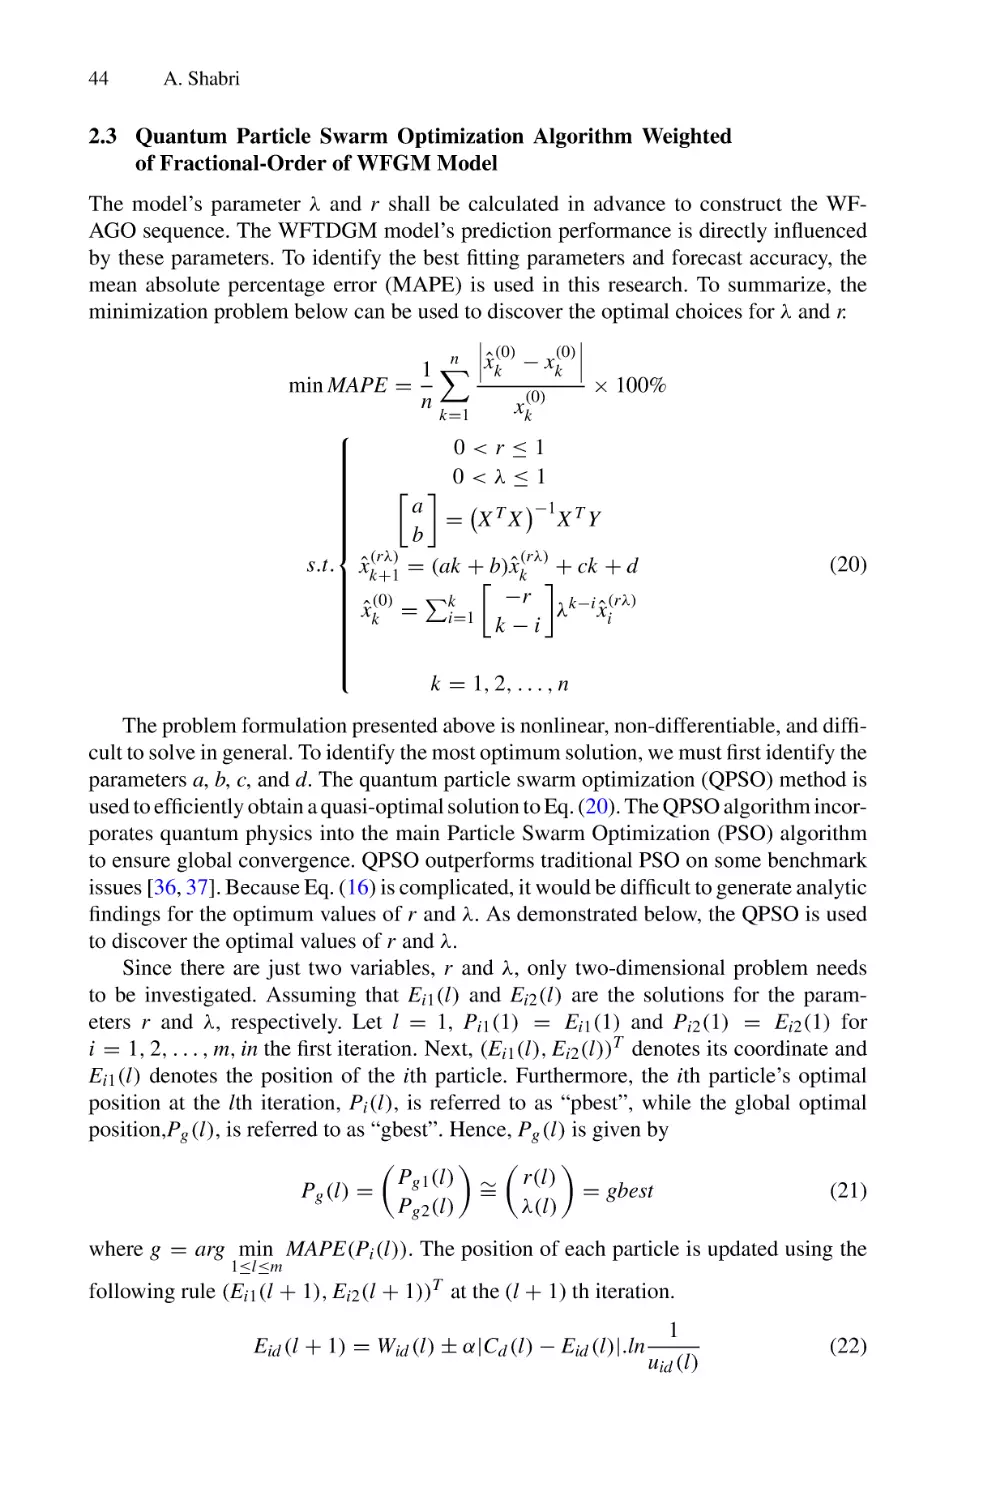 2.3 Quantum Particle Swarm Optimization Algorithm Weighted of Fractional-Order of WFGM Model